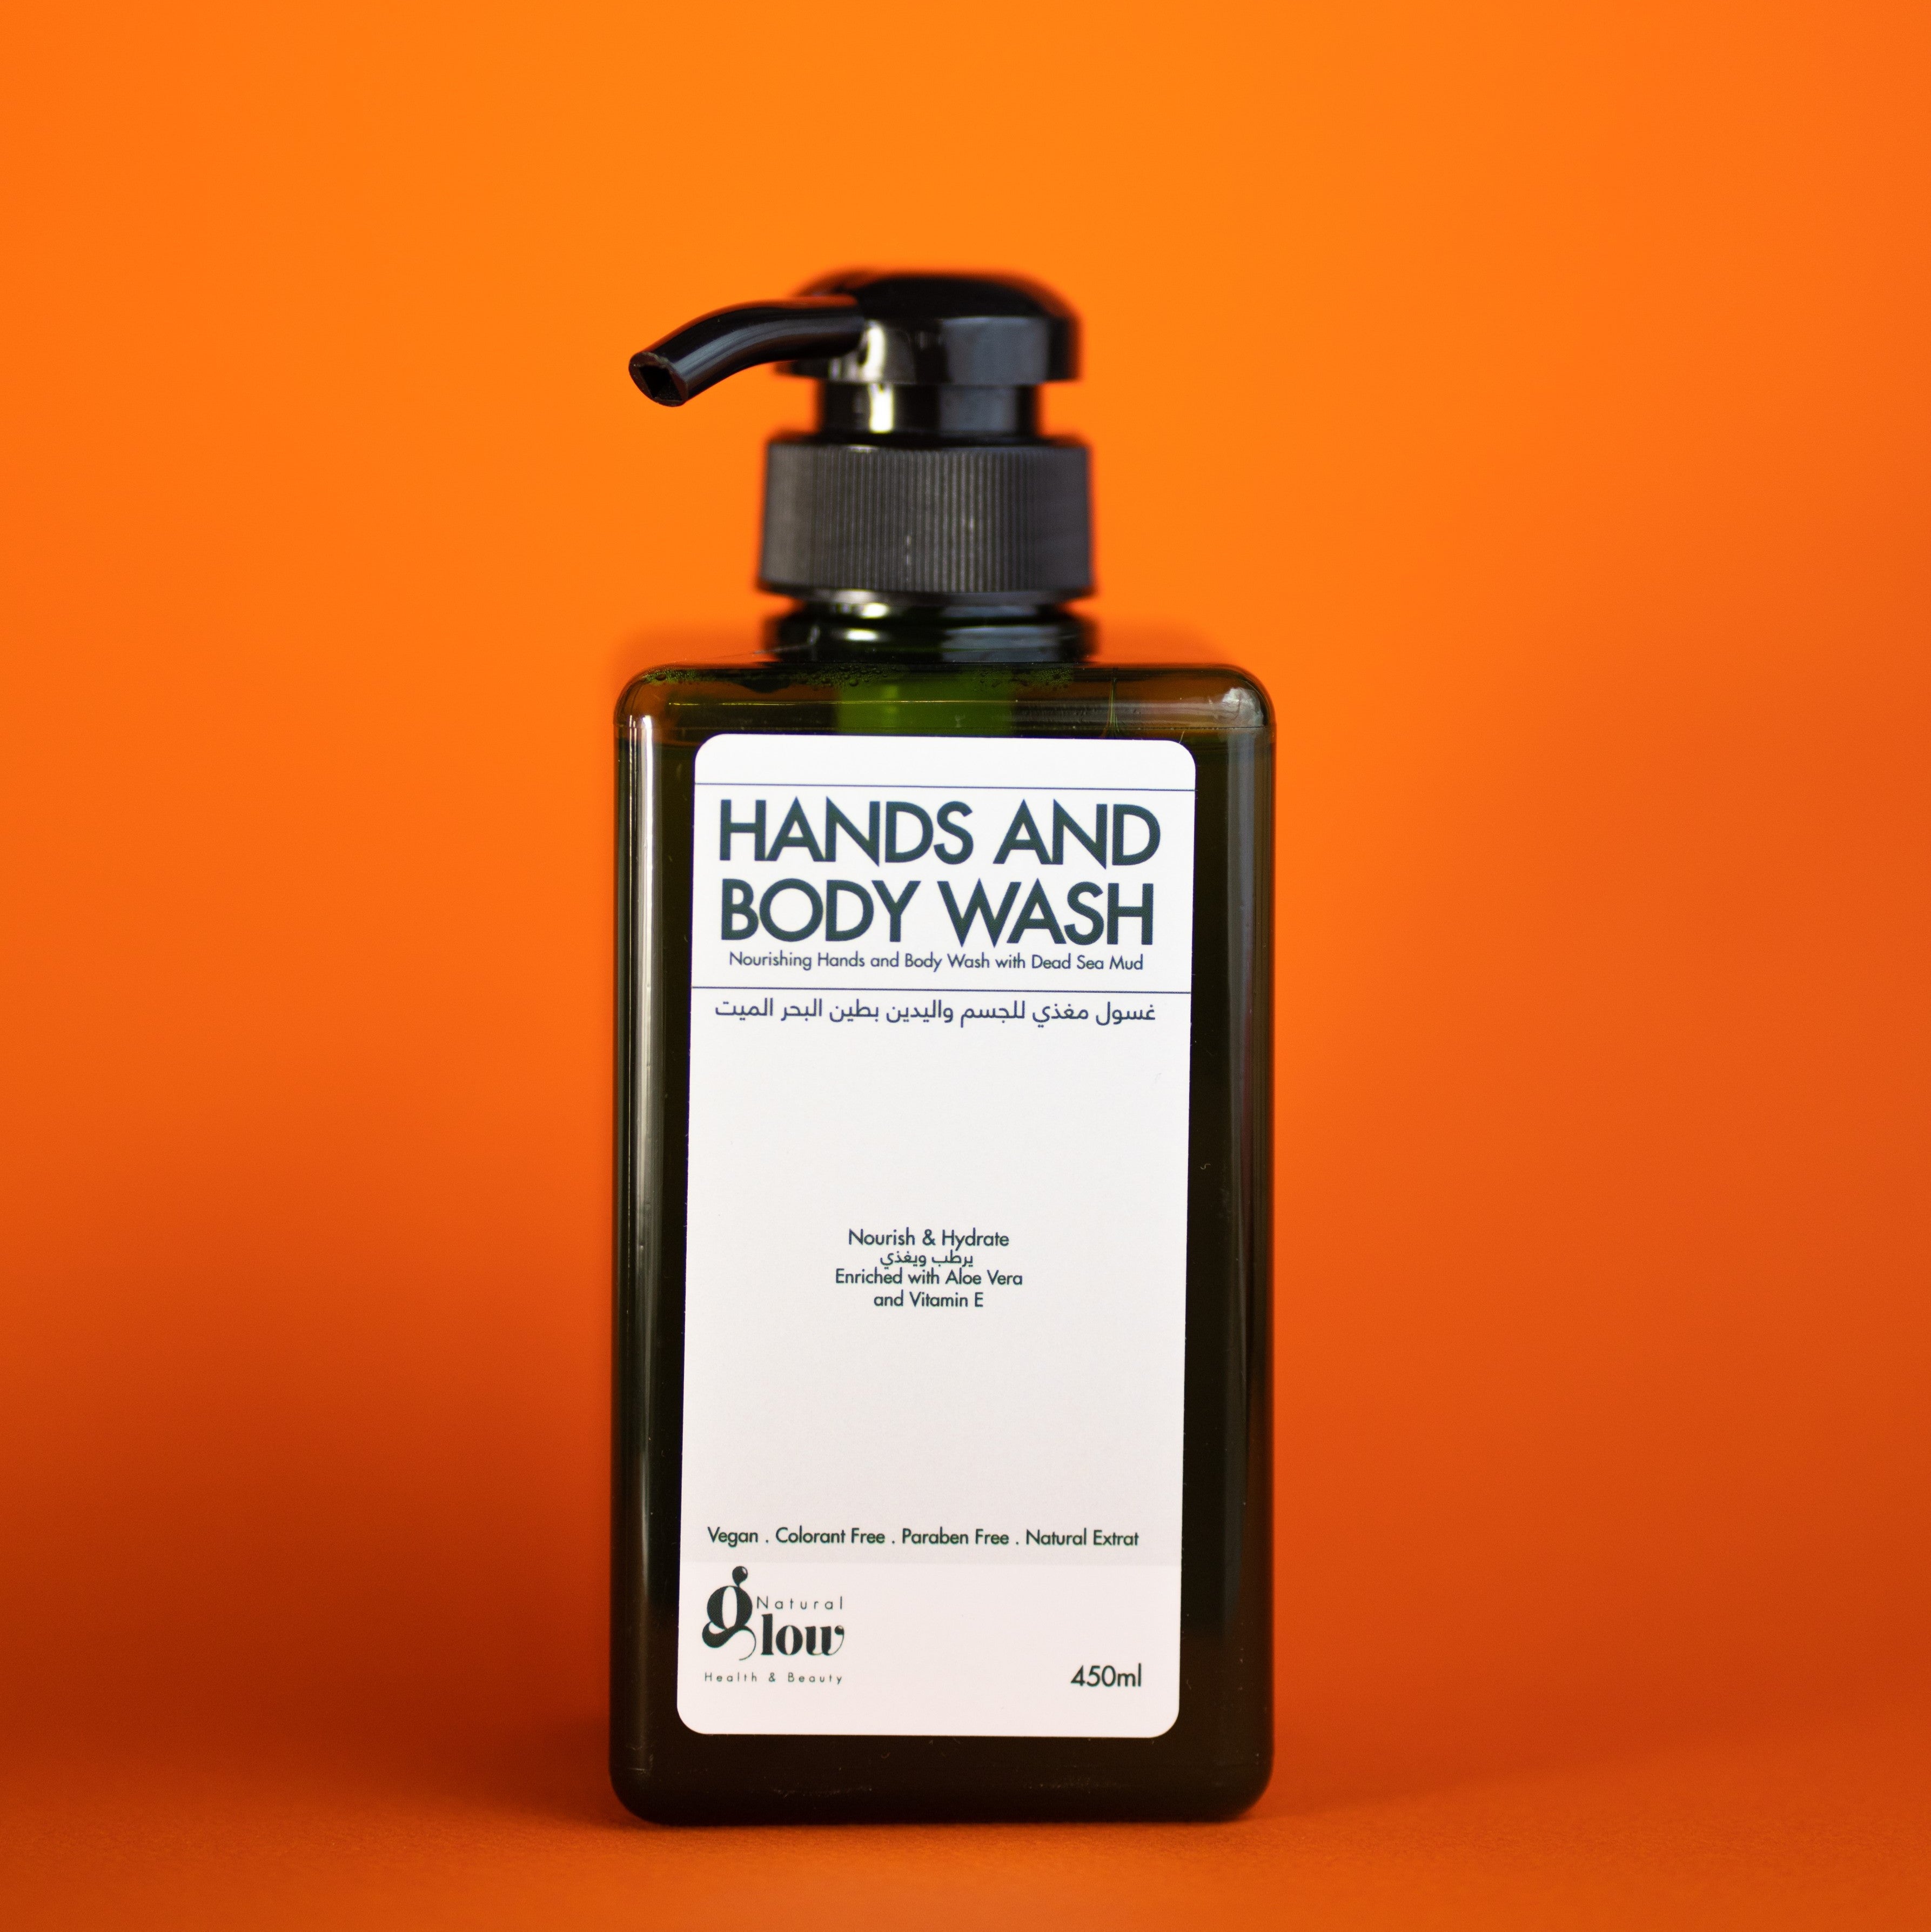 Nourishing Hands and Body Wash with Dead Sea Mud